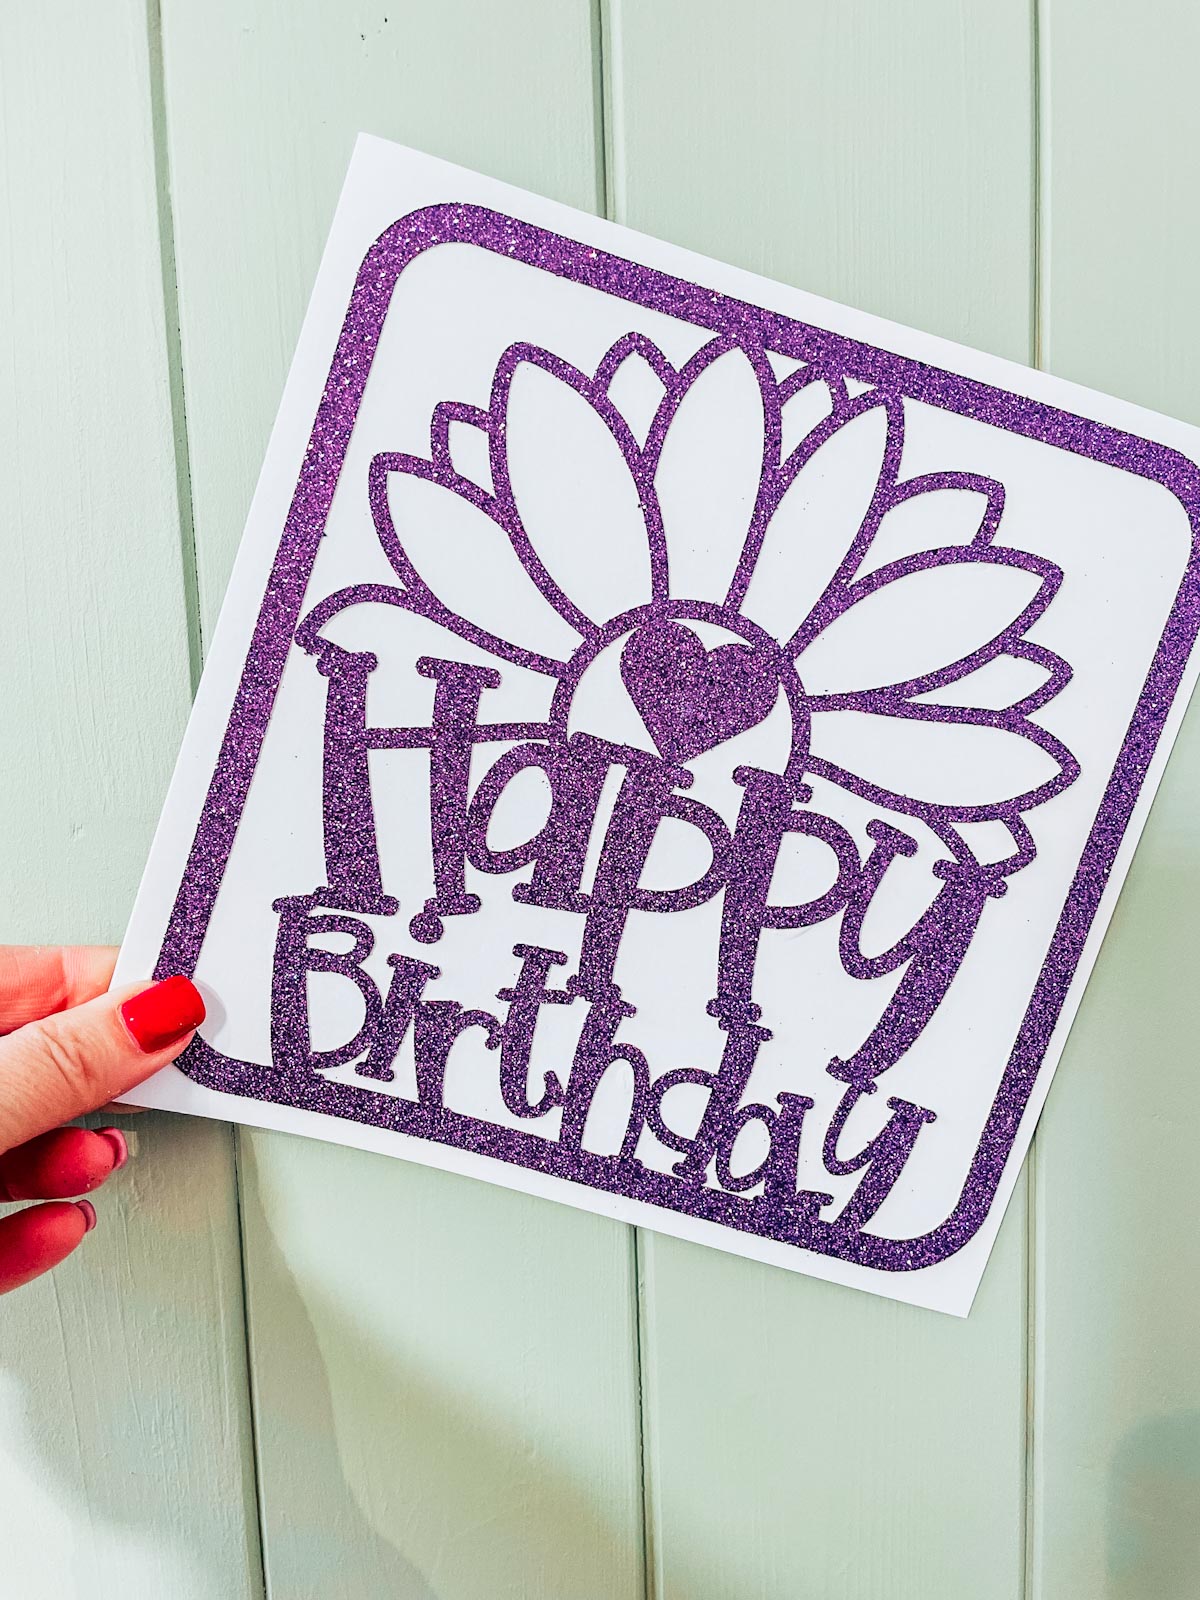 How to make easy cards with Cricut